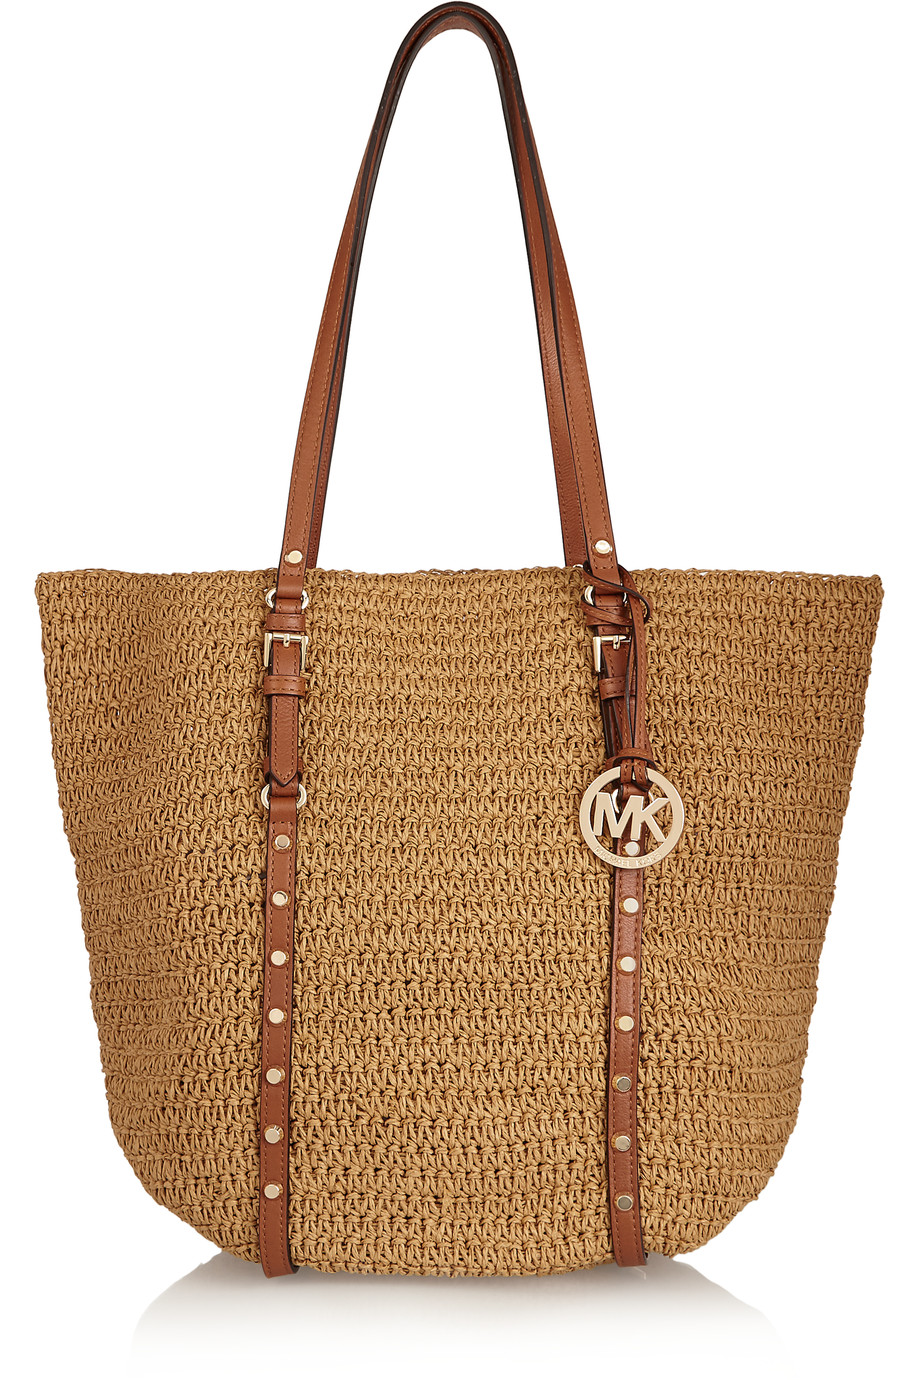 Michael Michael Kors Leather-trimmed Woven Straw Tote | ModeSens